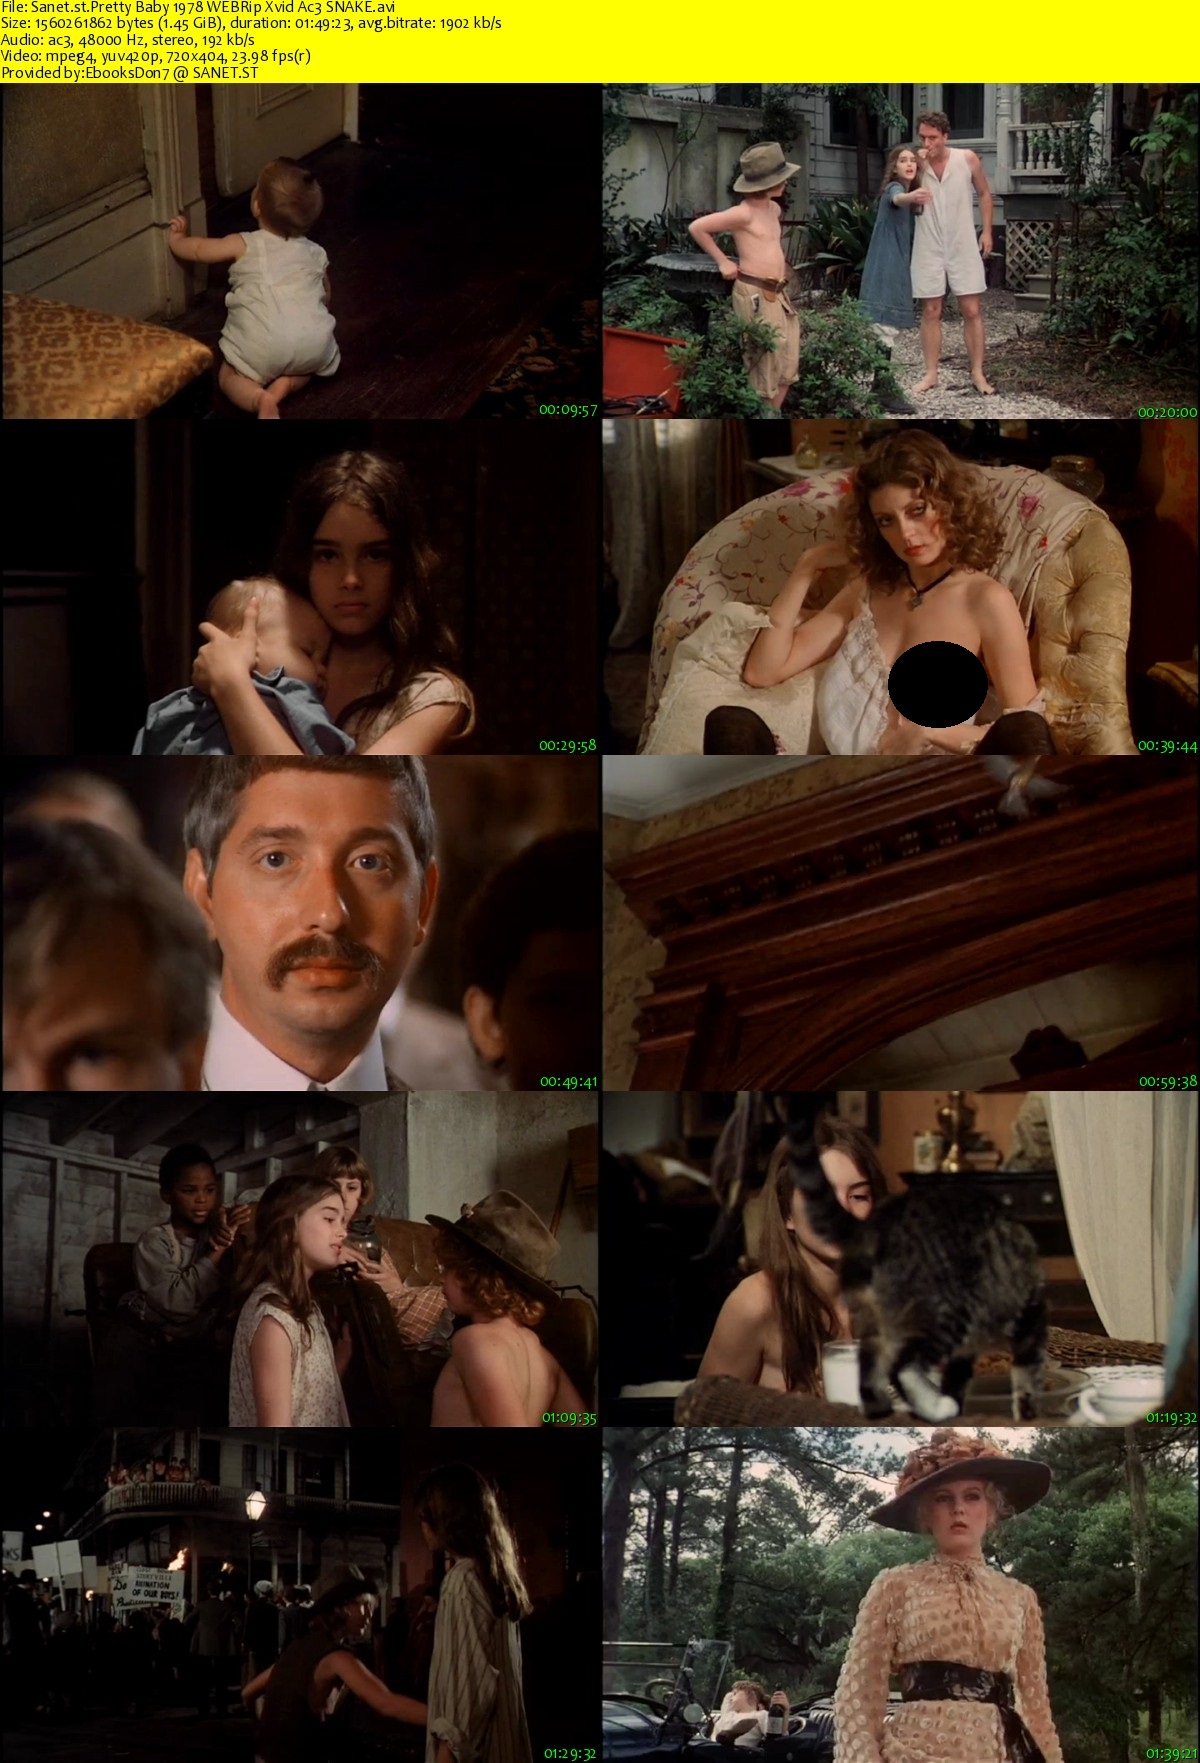 Download Pretty Baby 1978 WEBRip Xvid Ac3 SNAKE - SoftArchive from sanet.pi...